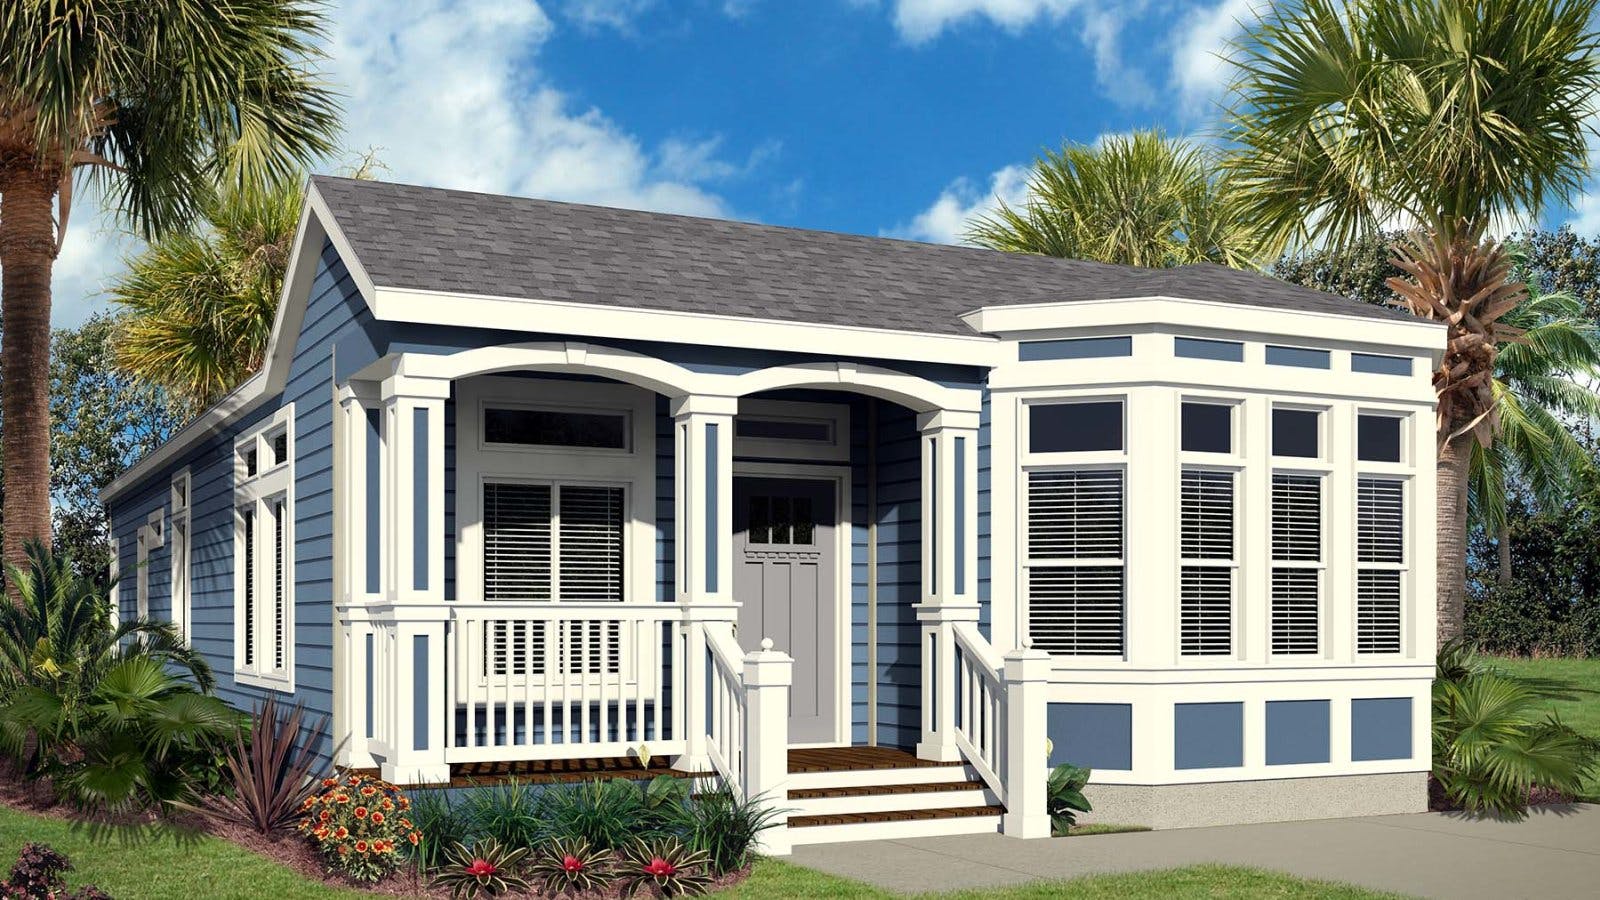 Kingsbrook kb-62 hero, elevation, and exterior home features